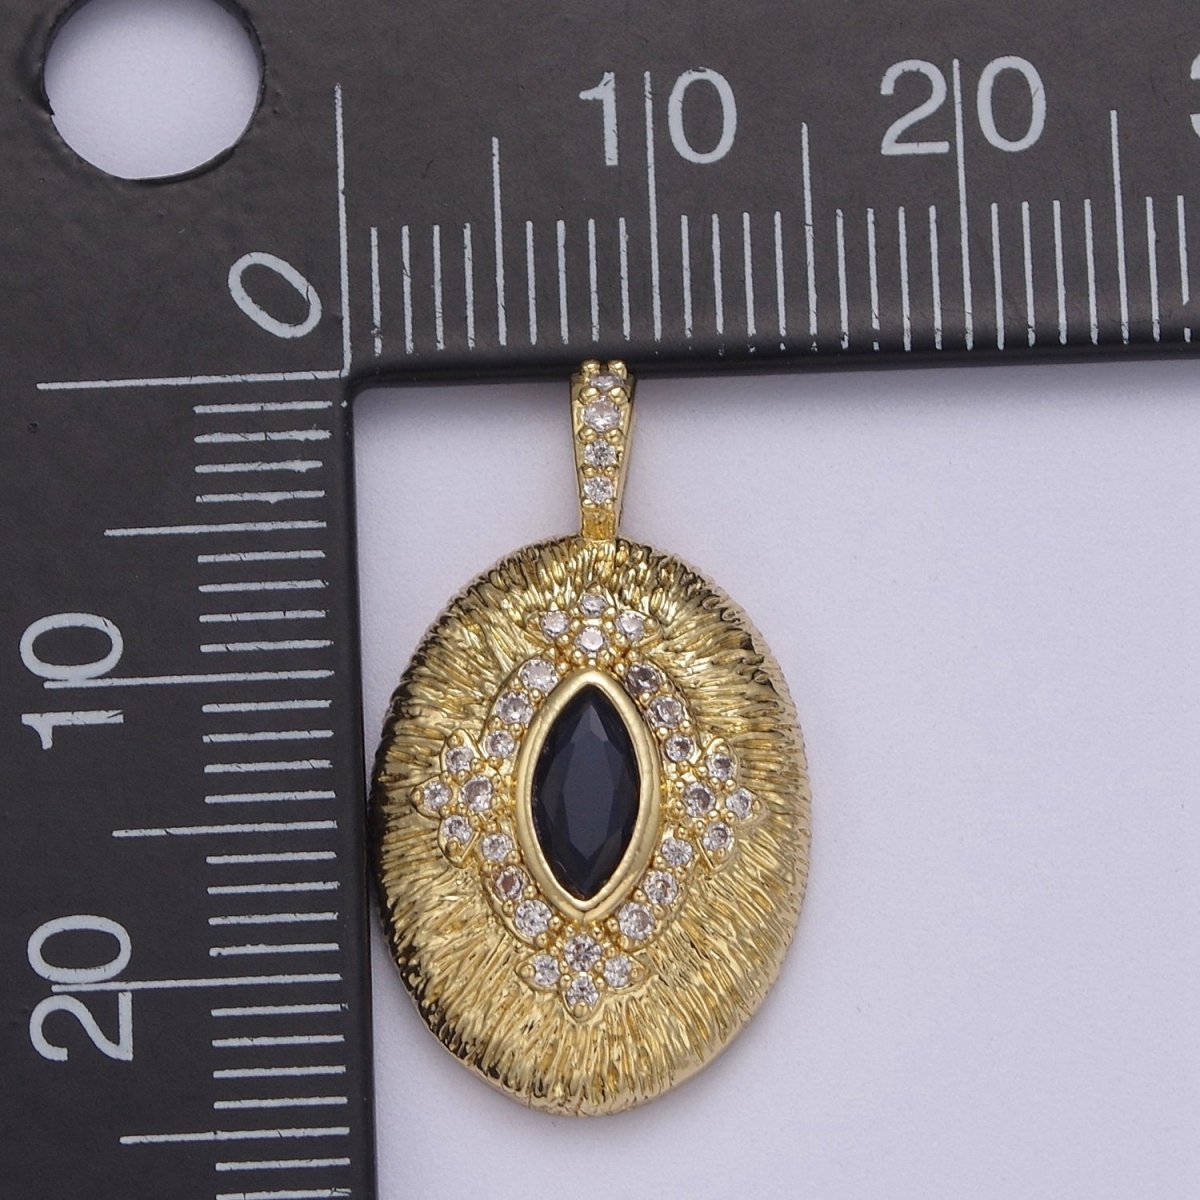 Gold Oval Eye Charm 24k Gold Filled with Blue CZ Eye Oval Medallion Pendant DIY Jewelry Making Supplies J-346 - DLUXCA